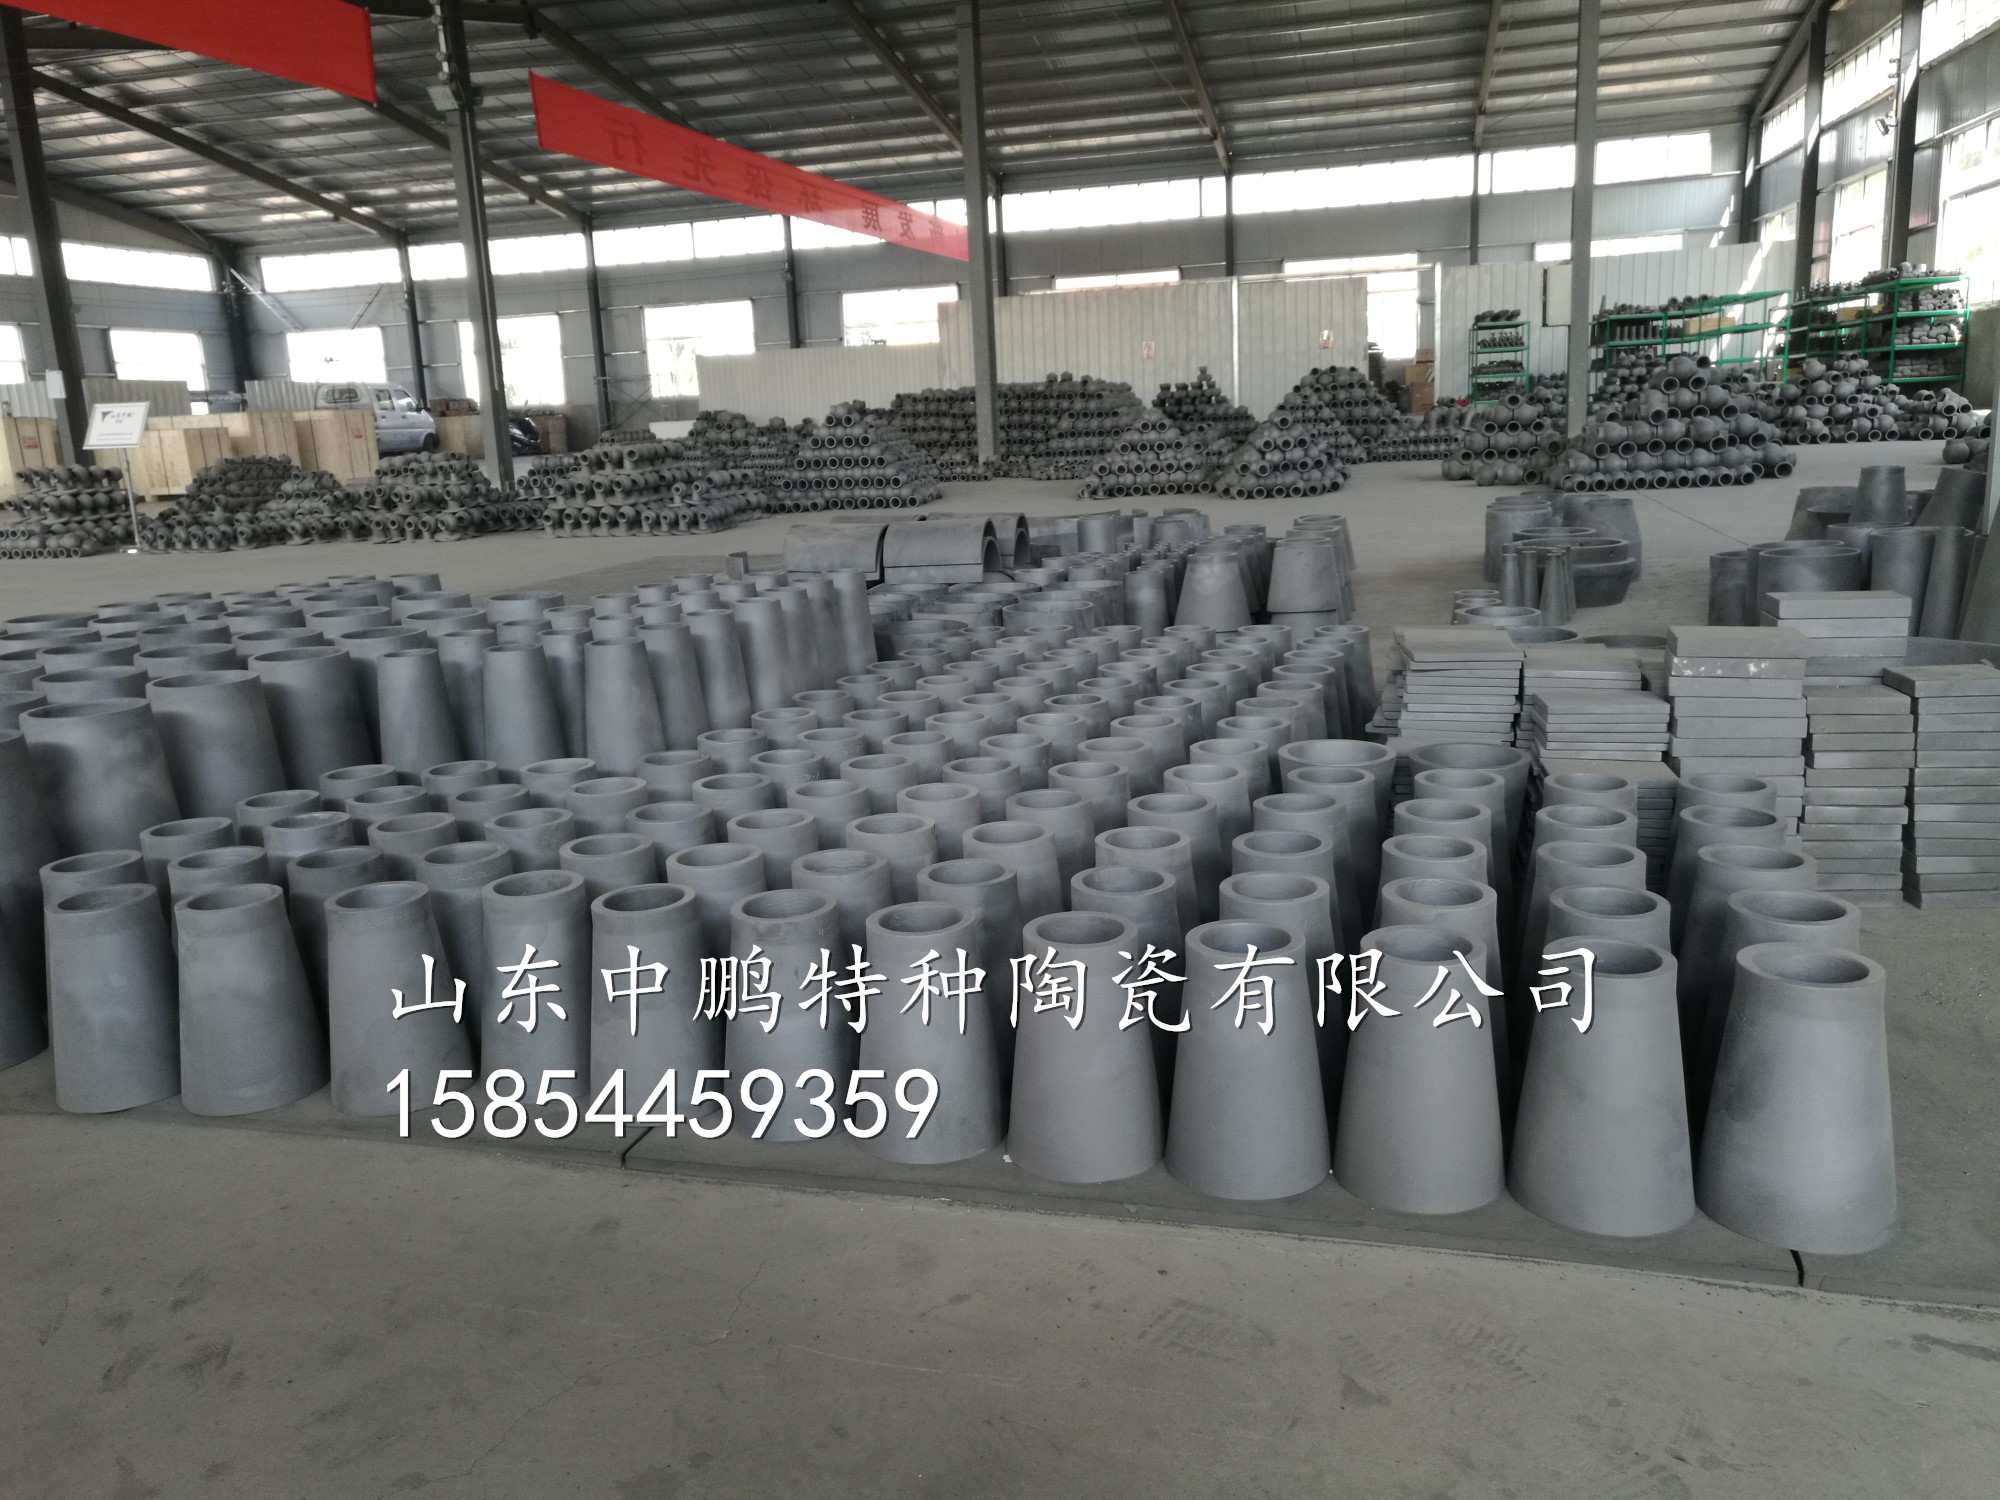 Low MOQ for Furnace Heater Tubes -
 Wear Resistant Cyclone Silicon carbide cylinder, cone, spigot manufaturer factory in mining, petrochemichal, power plant, chemical industry – ZhongPeng